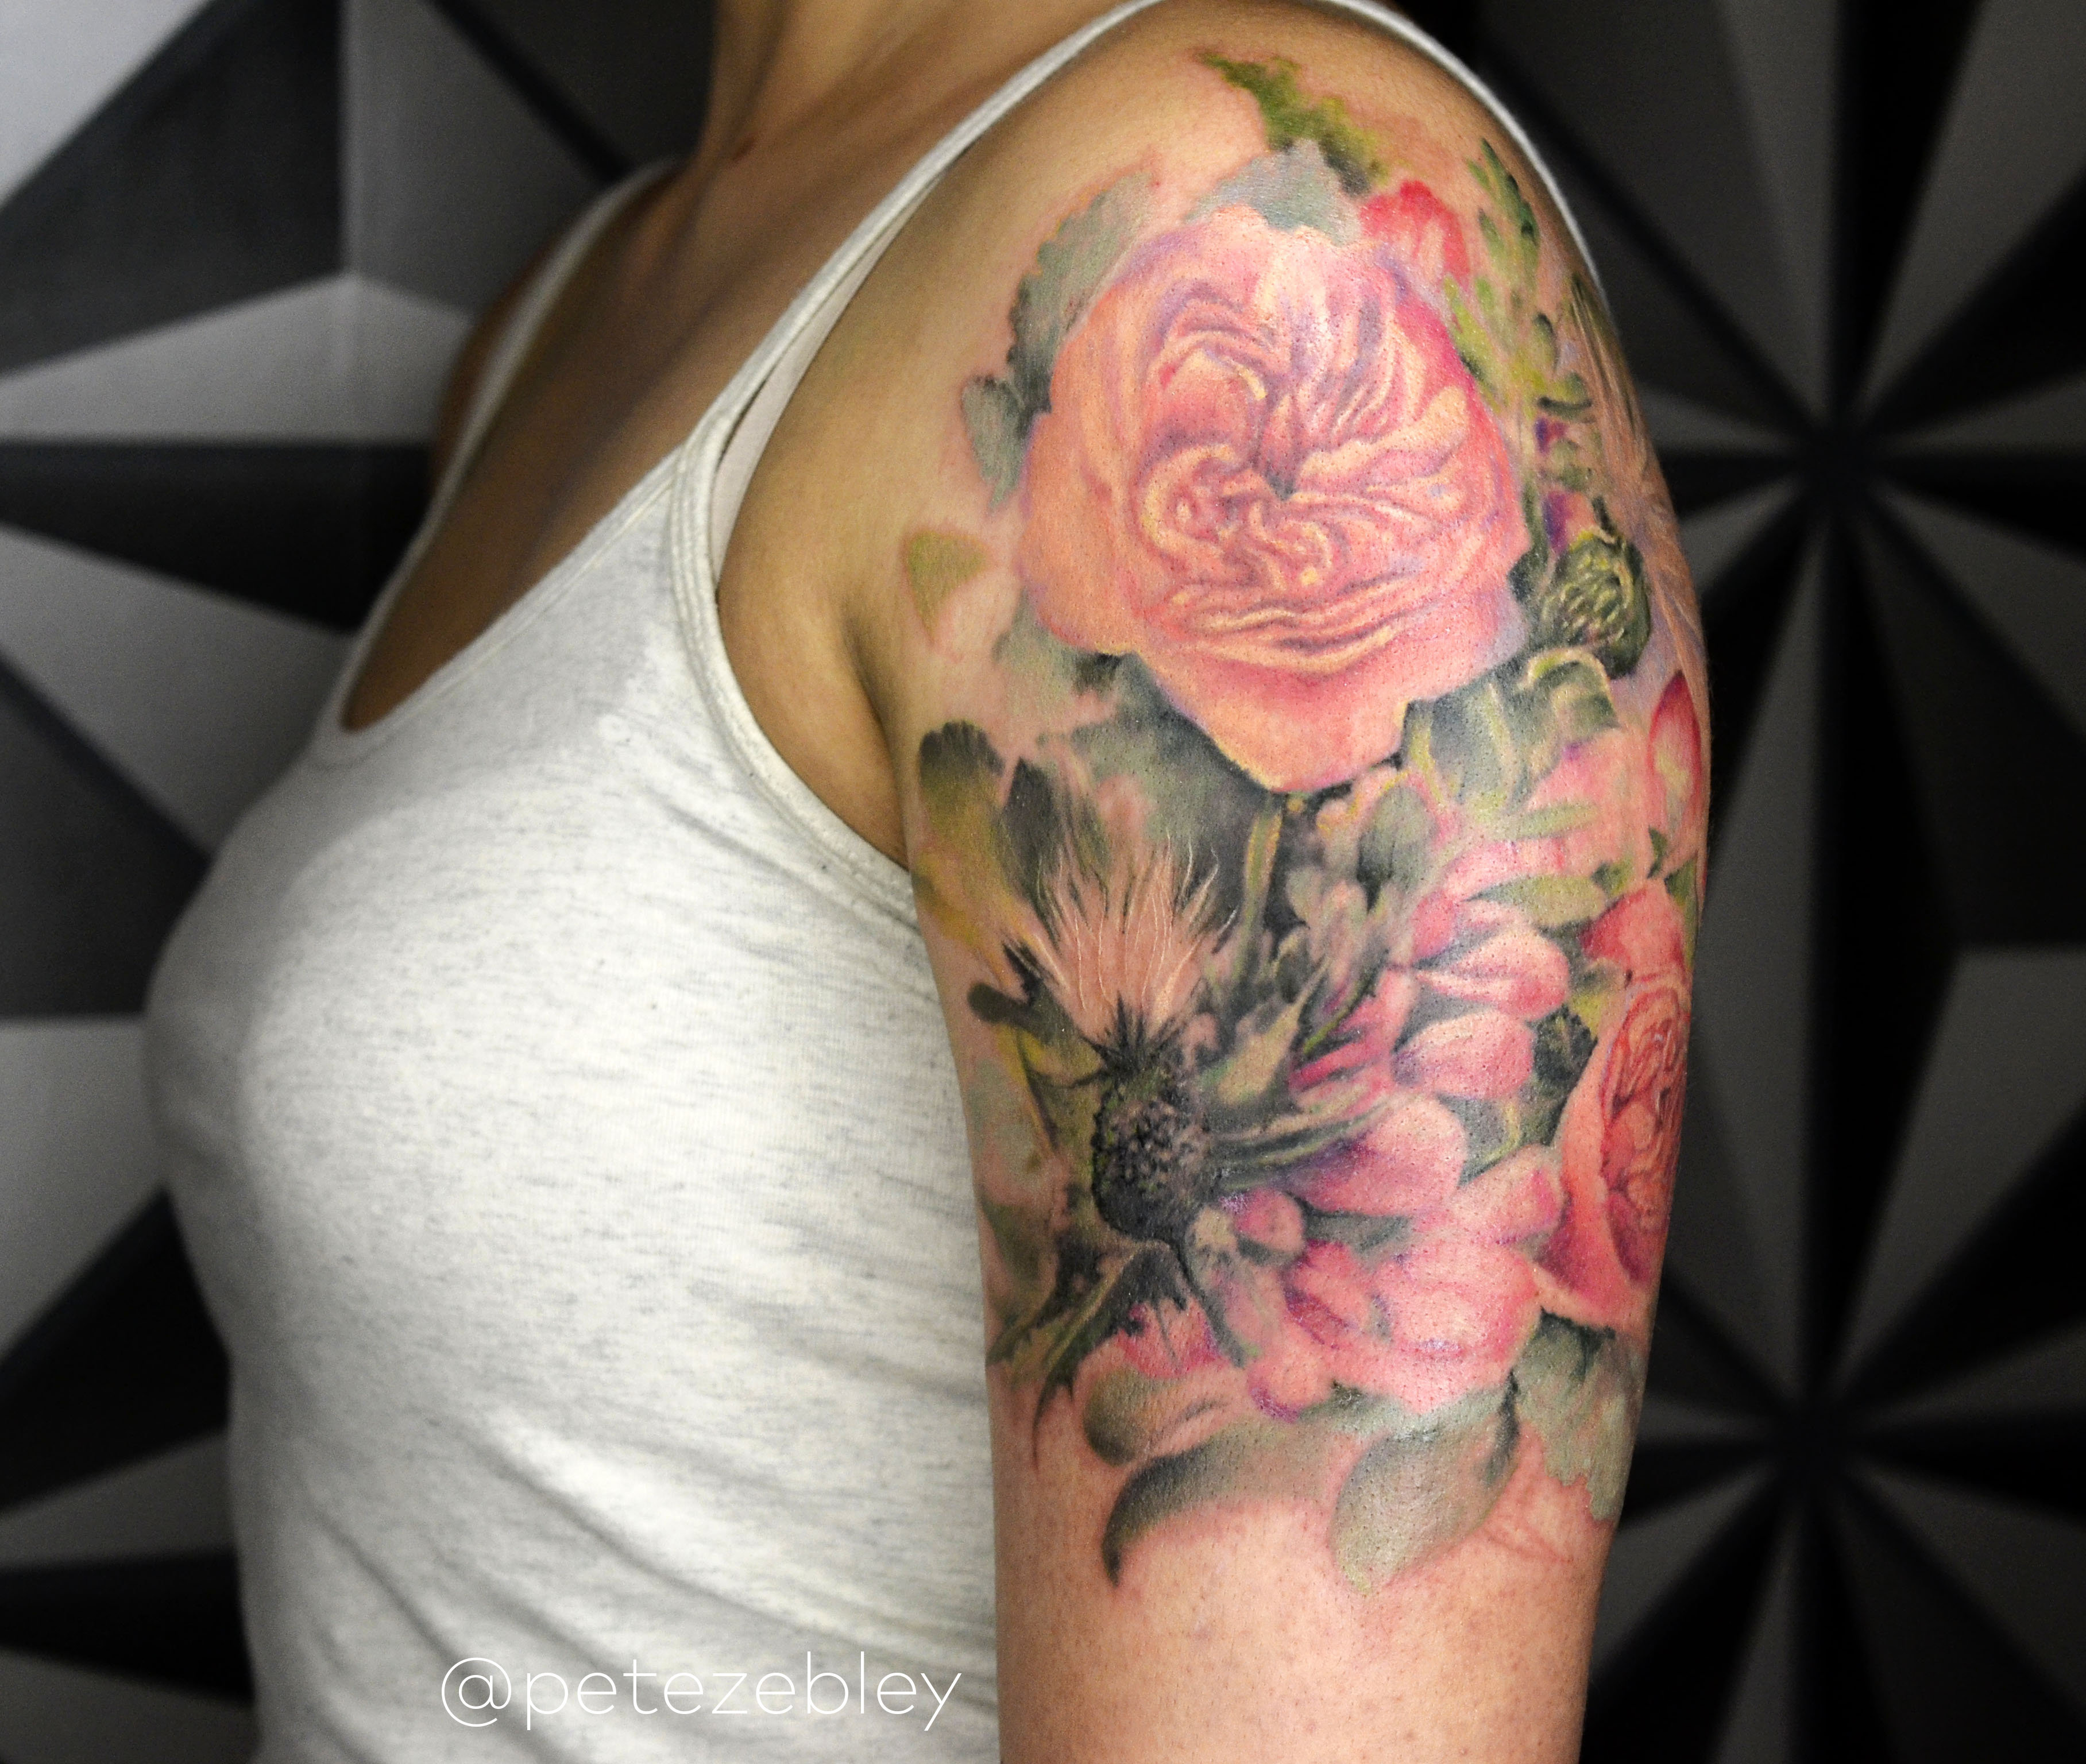 My first tattoo Family birth flowers by unclelaura at Darling Tattoos   rtattoo